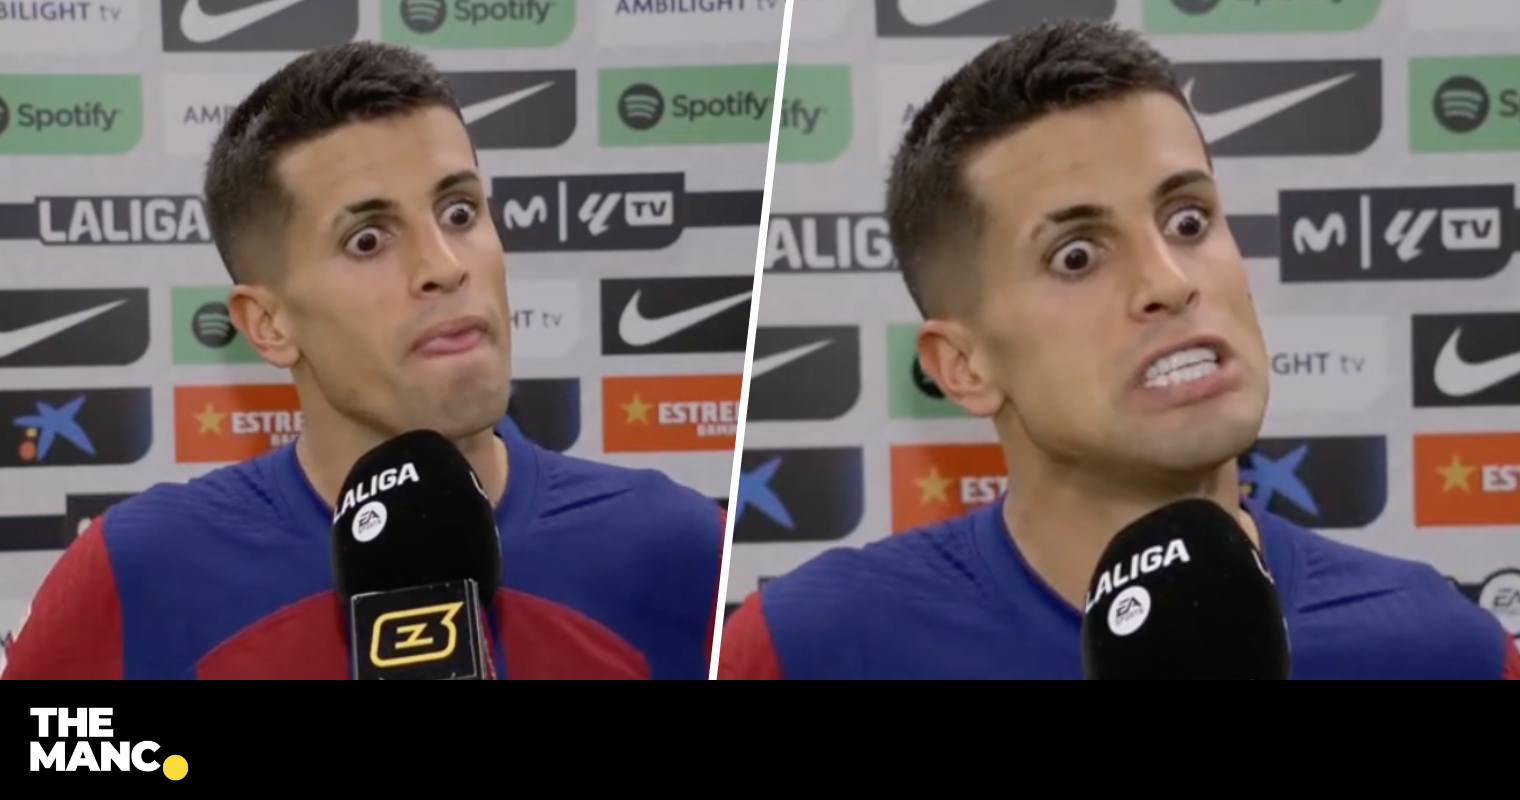 Manchester City loanee João Cancelo looks 'possessed' in viral post ...